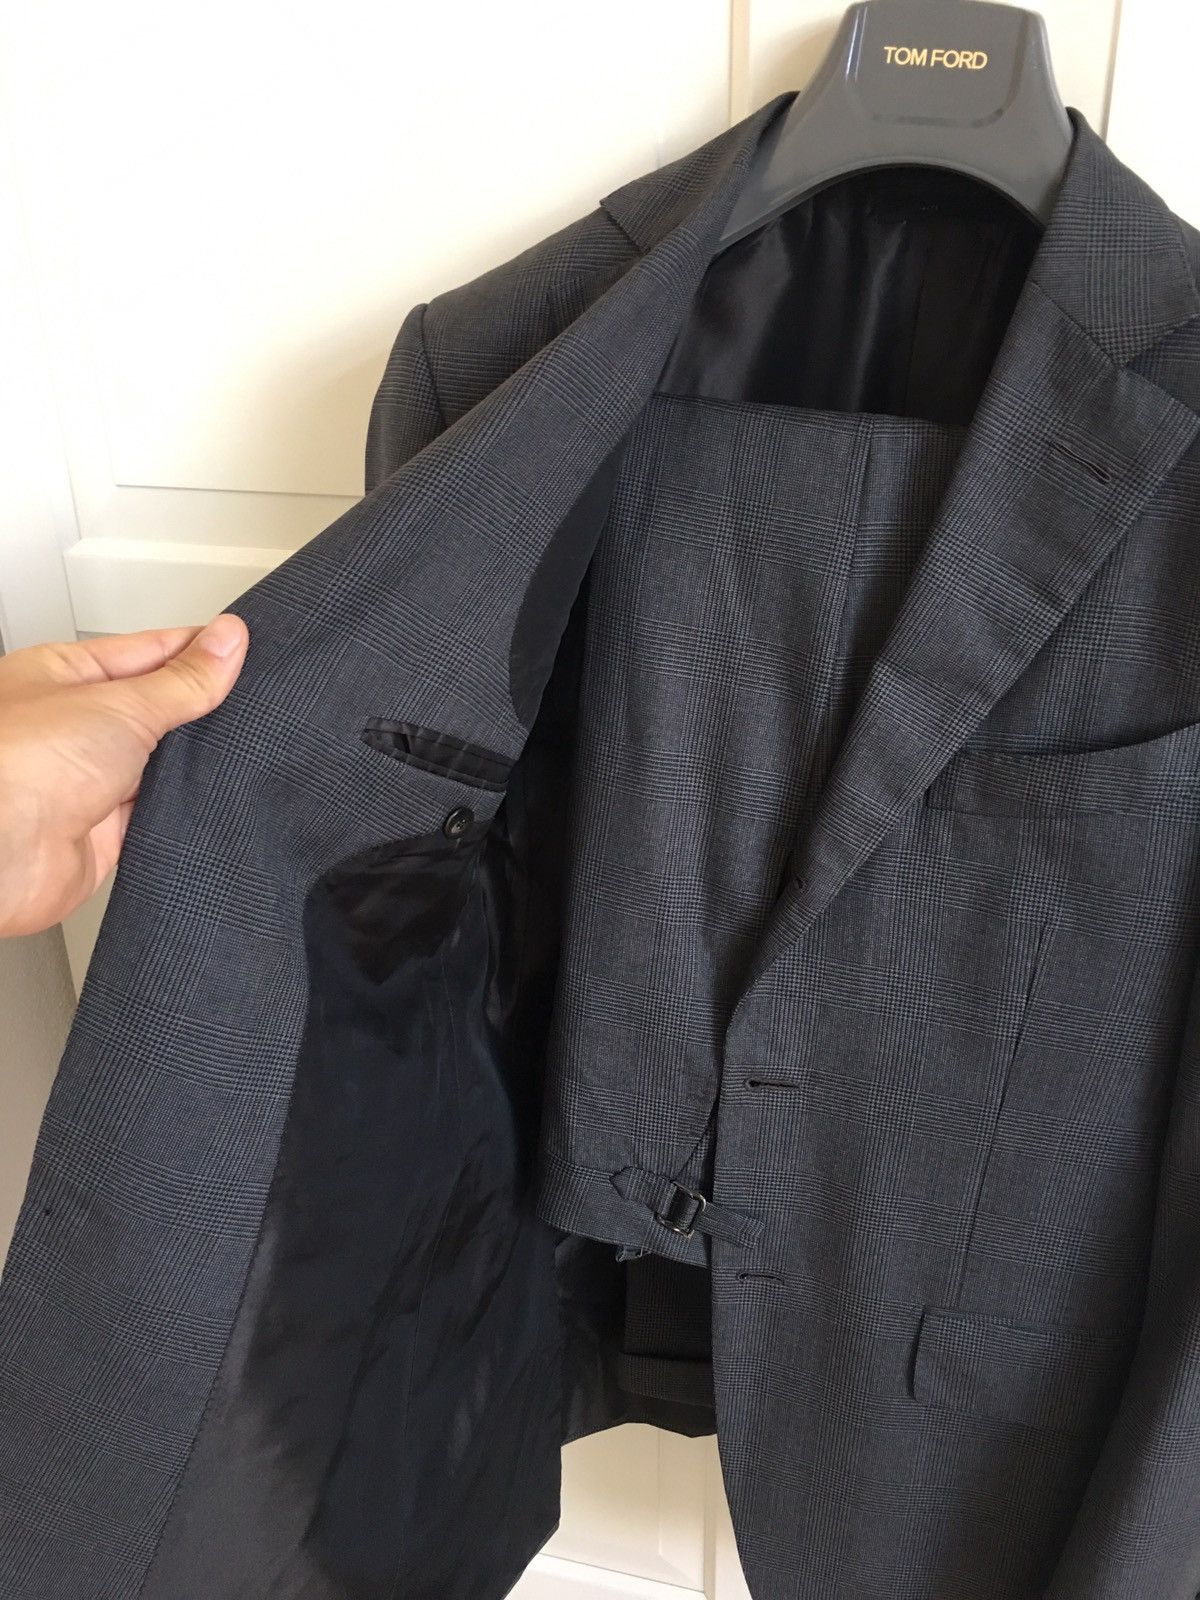 Tom Ford Tom Ford Suit Size 38R - 2 Preview